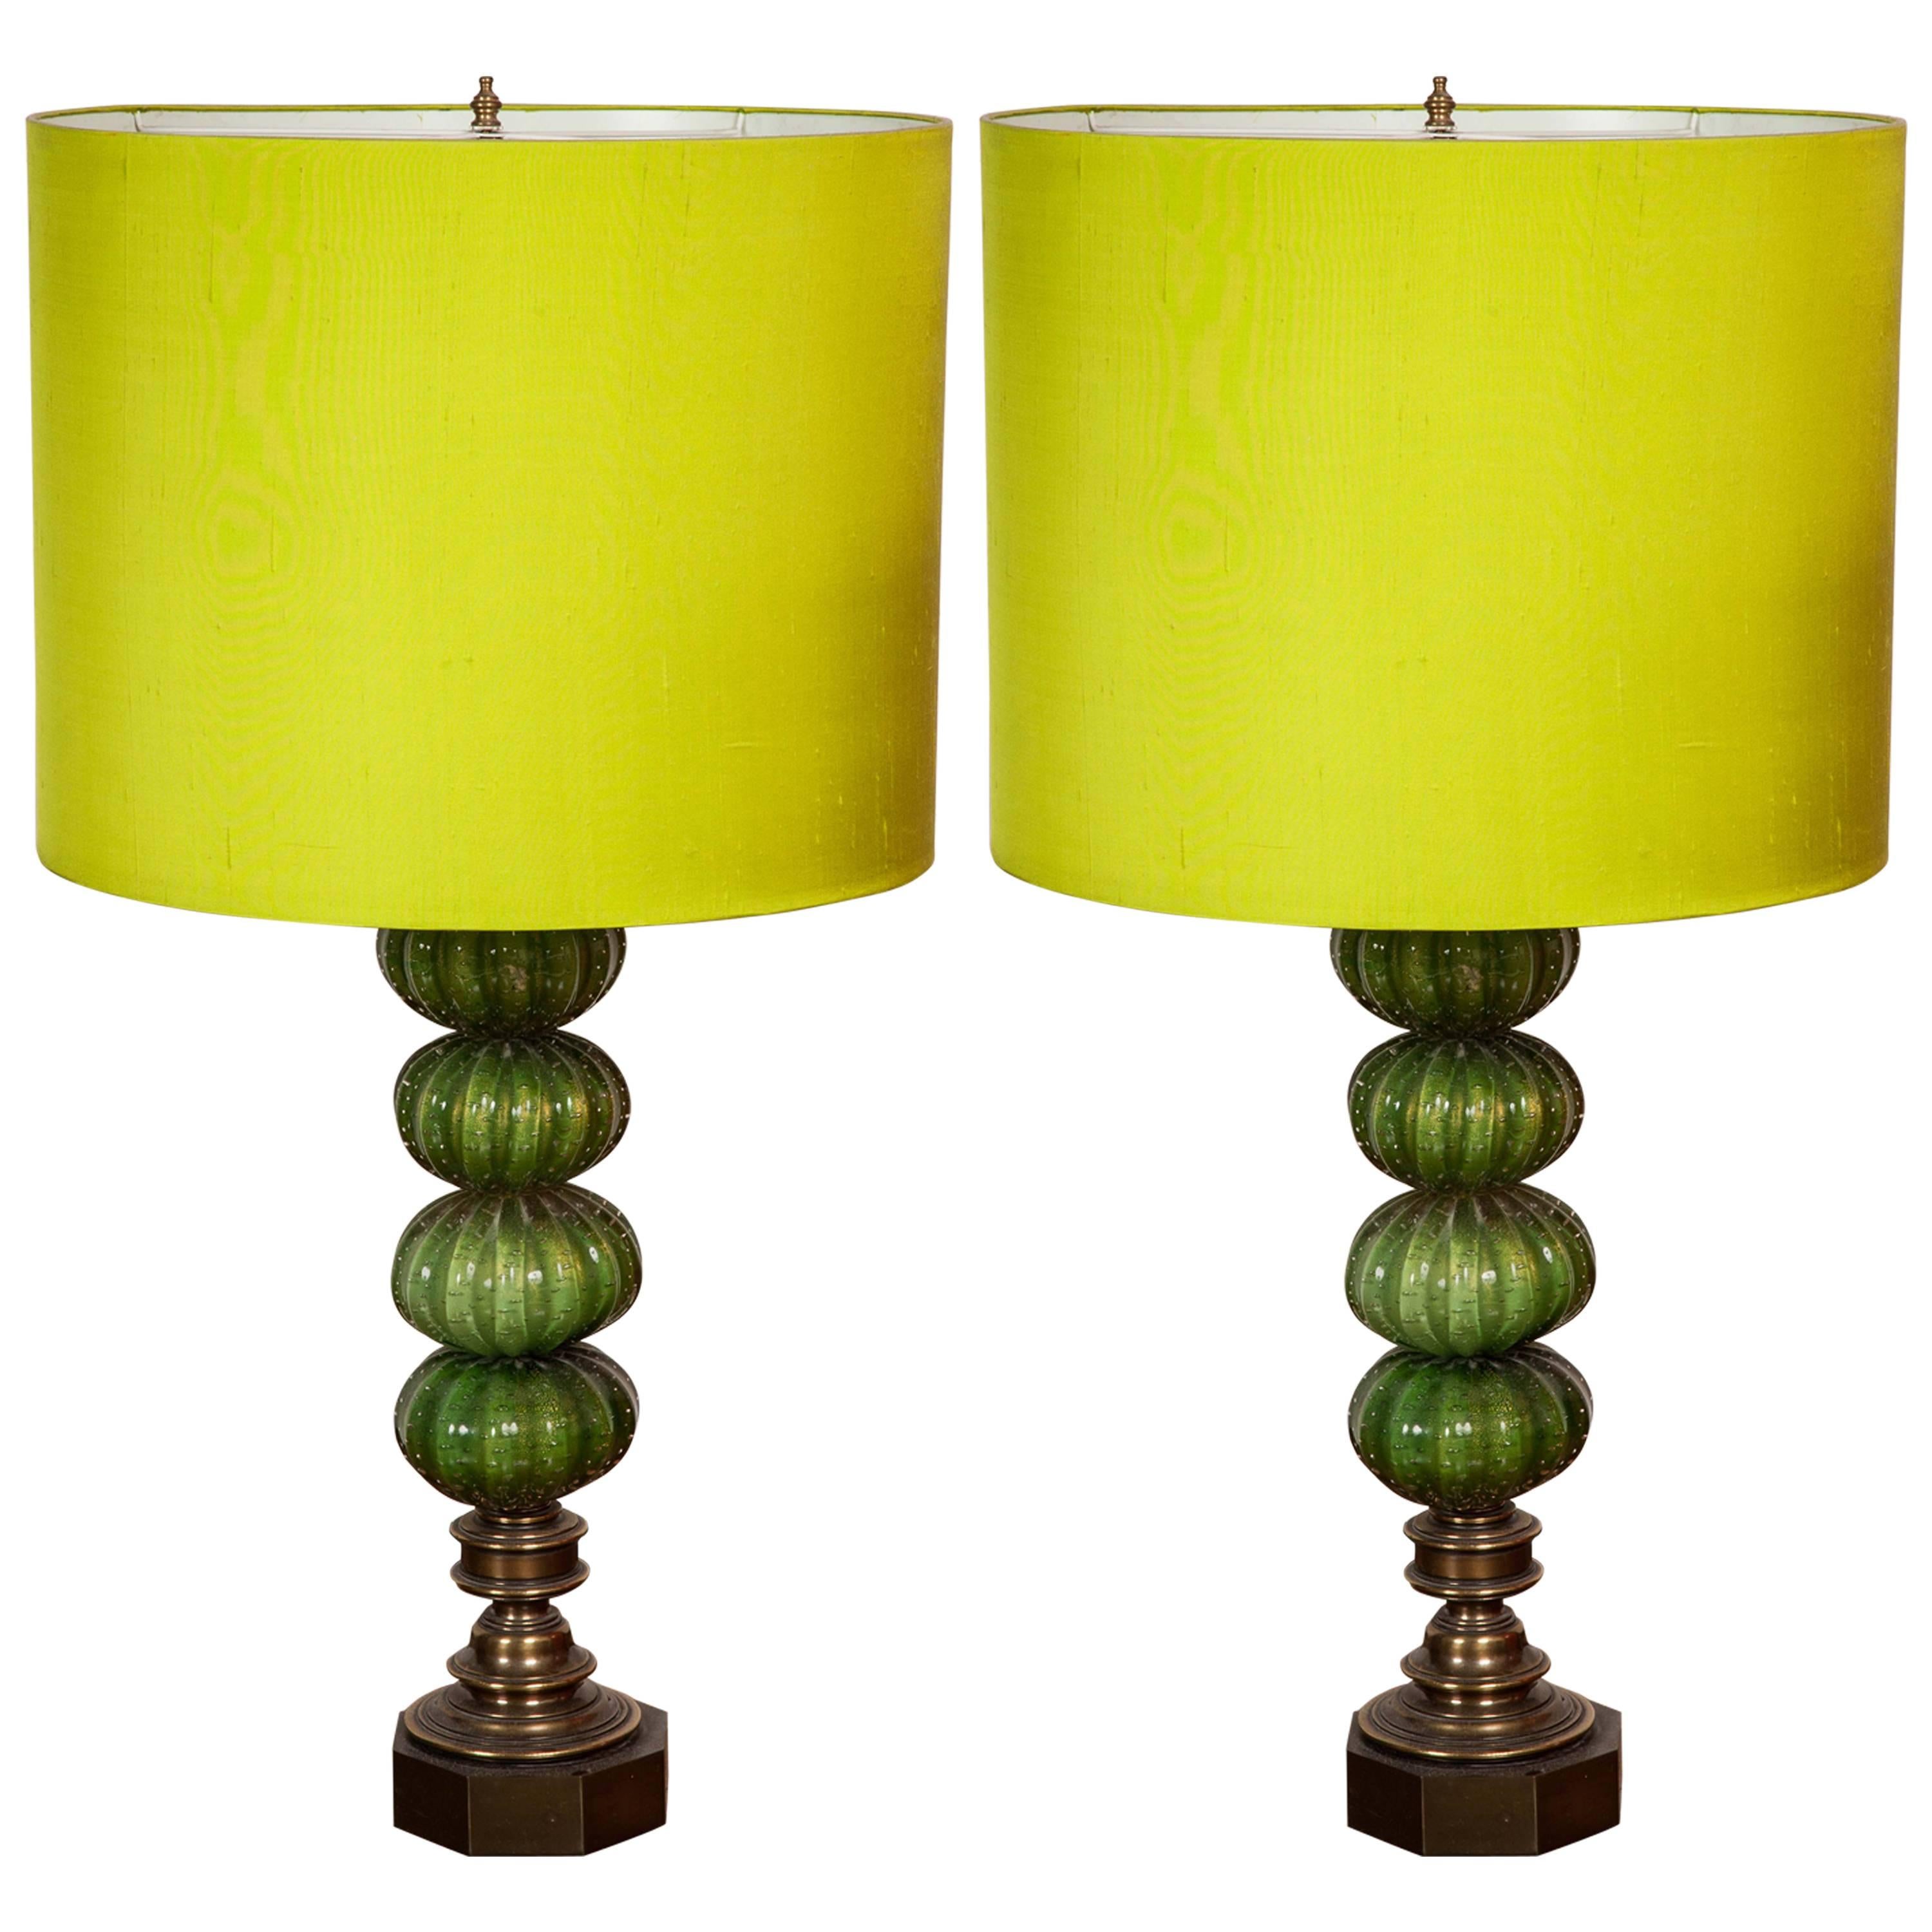 Pair of Green Murano Glass Lamp Bases with Green Shades